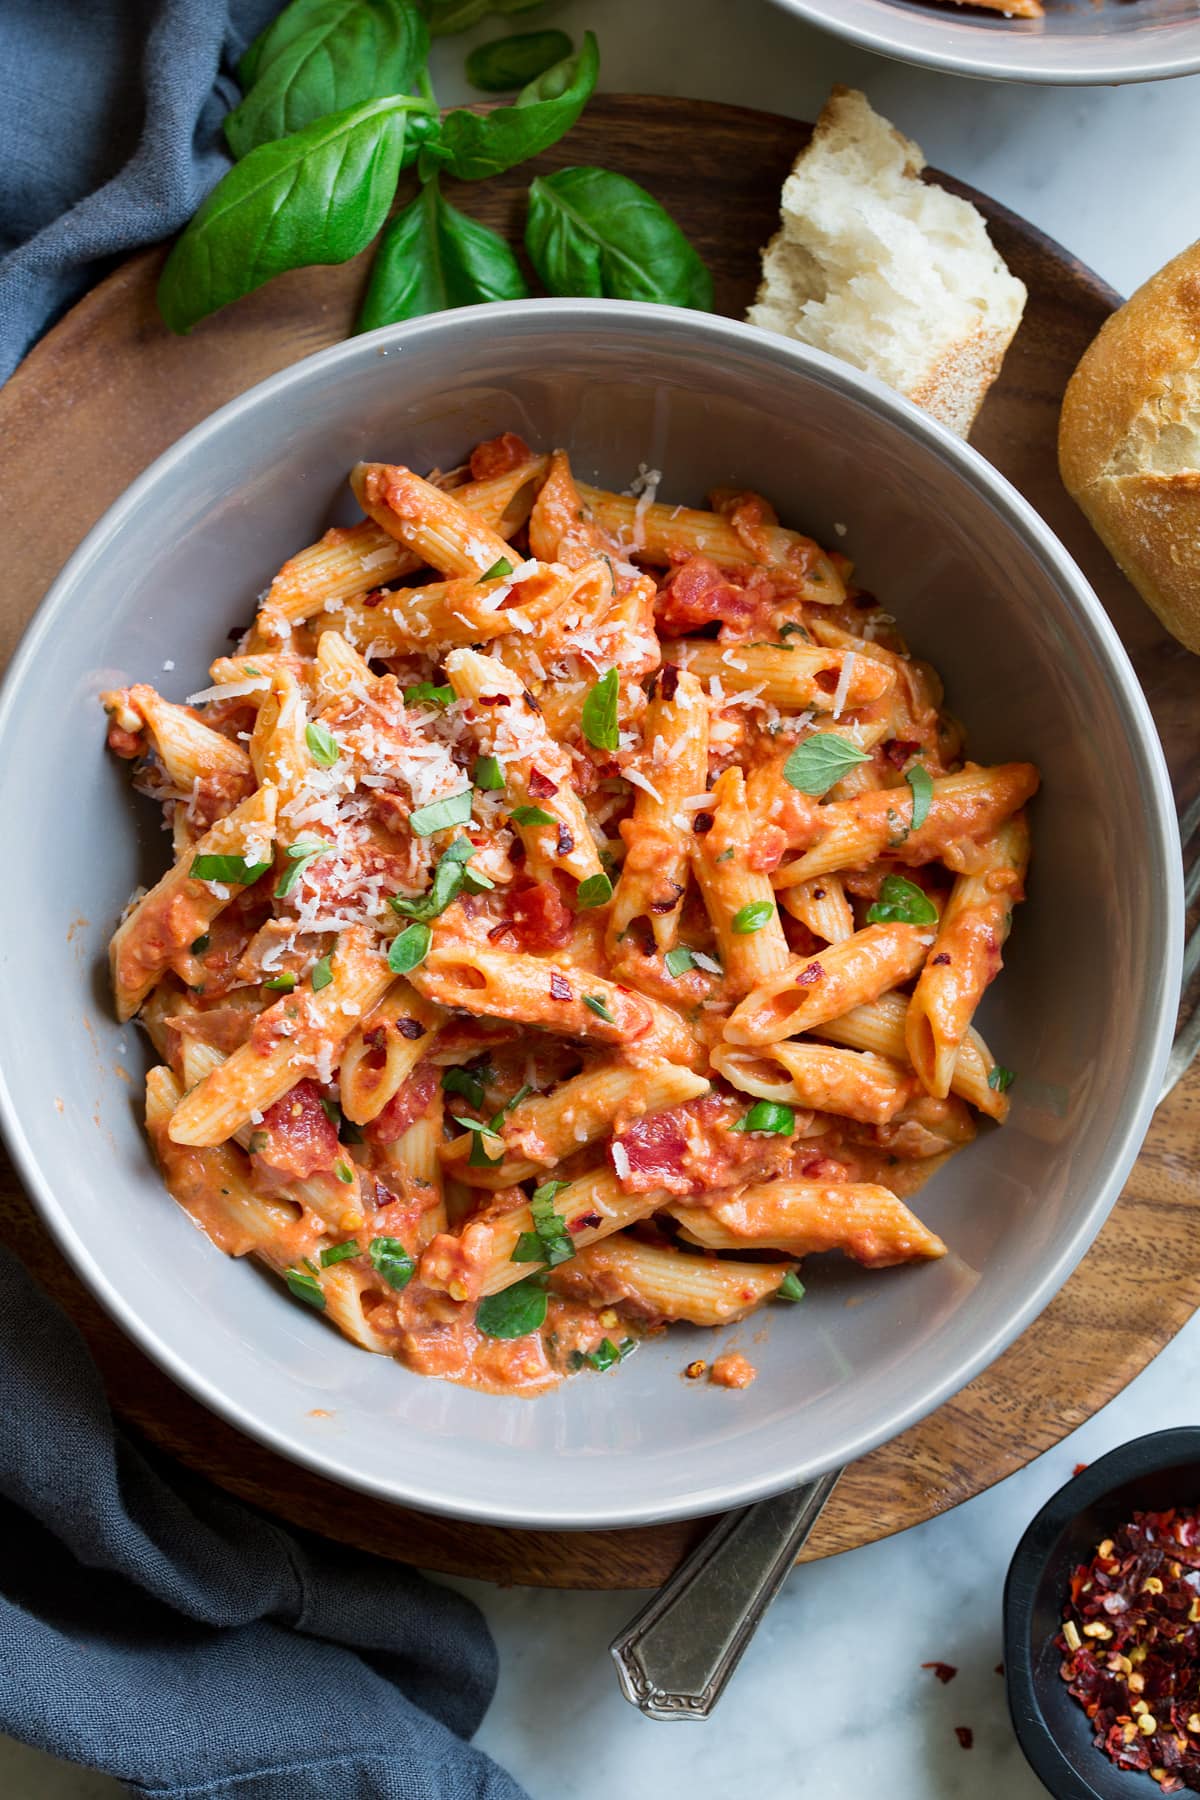 Pasta bowl filled with penne tossed with vodka sauce and garnished with fresh basil and oregano. Served with a side of fresh Italian bread.